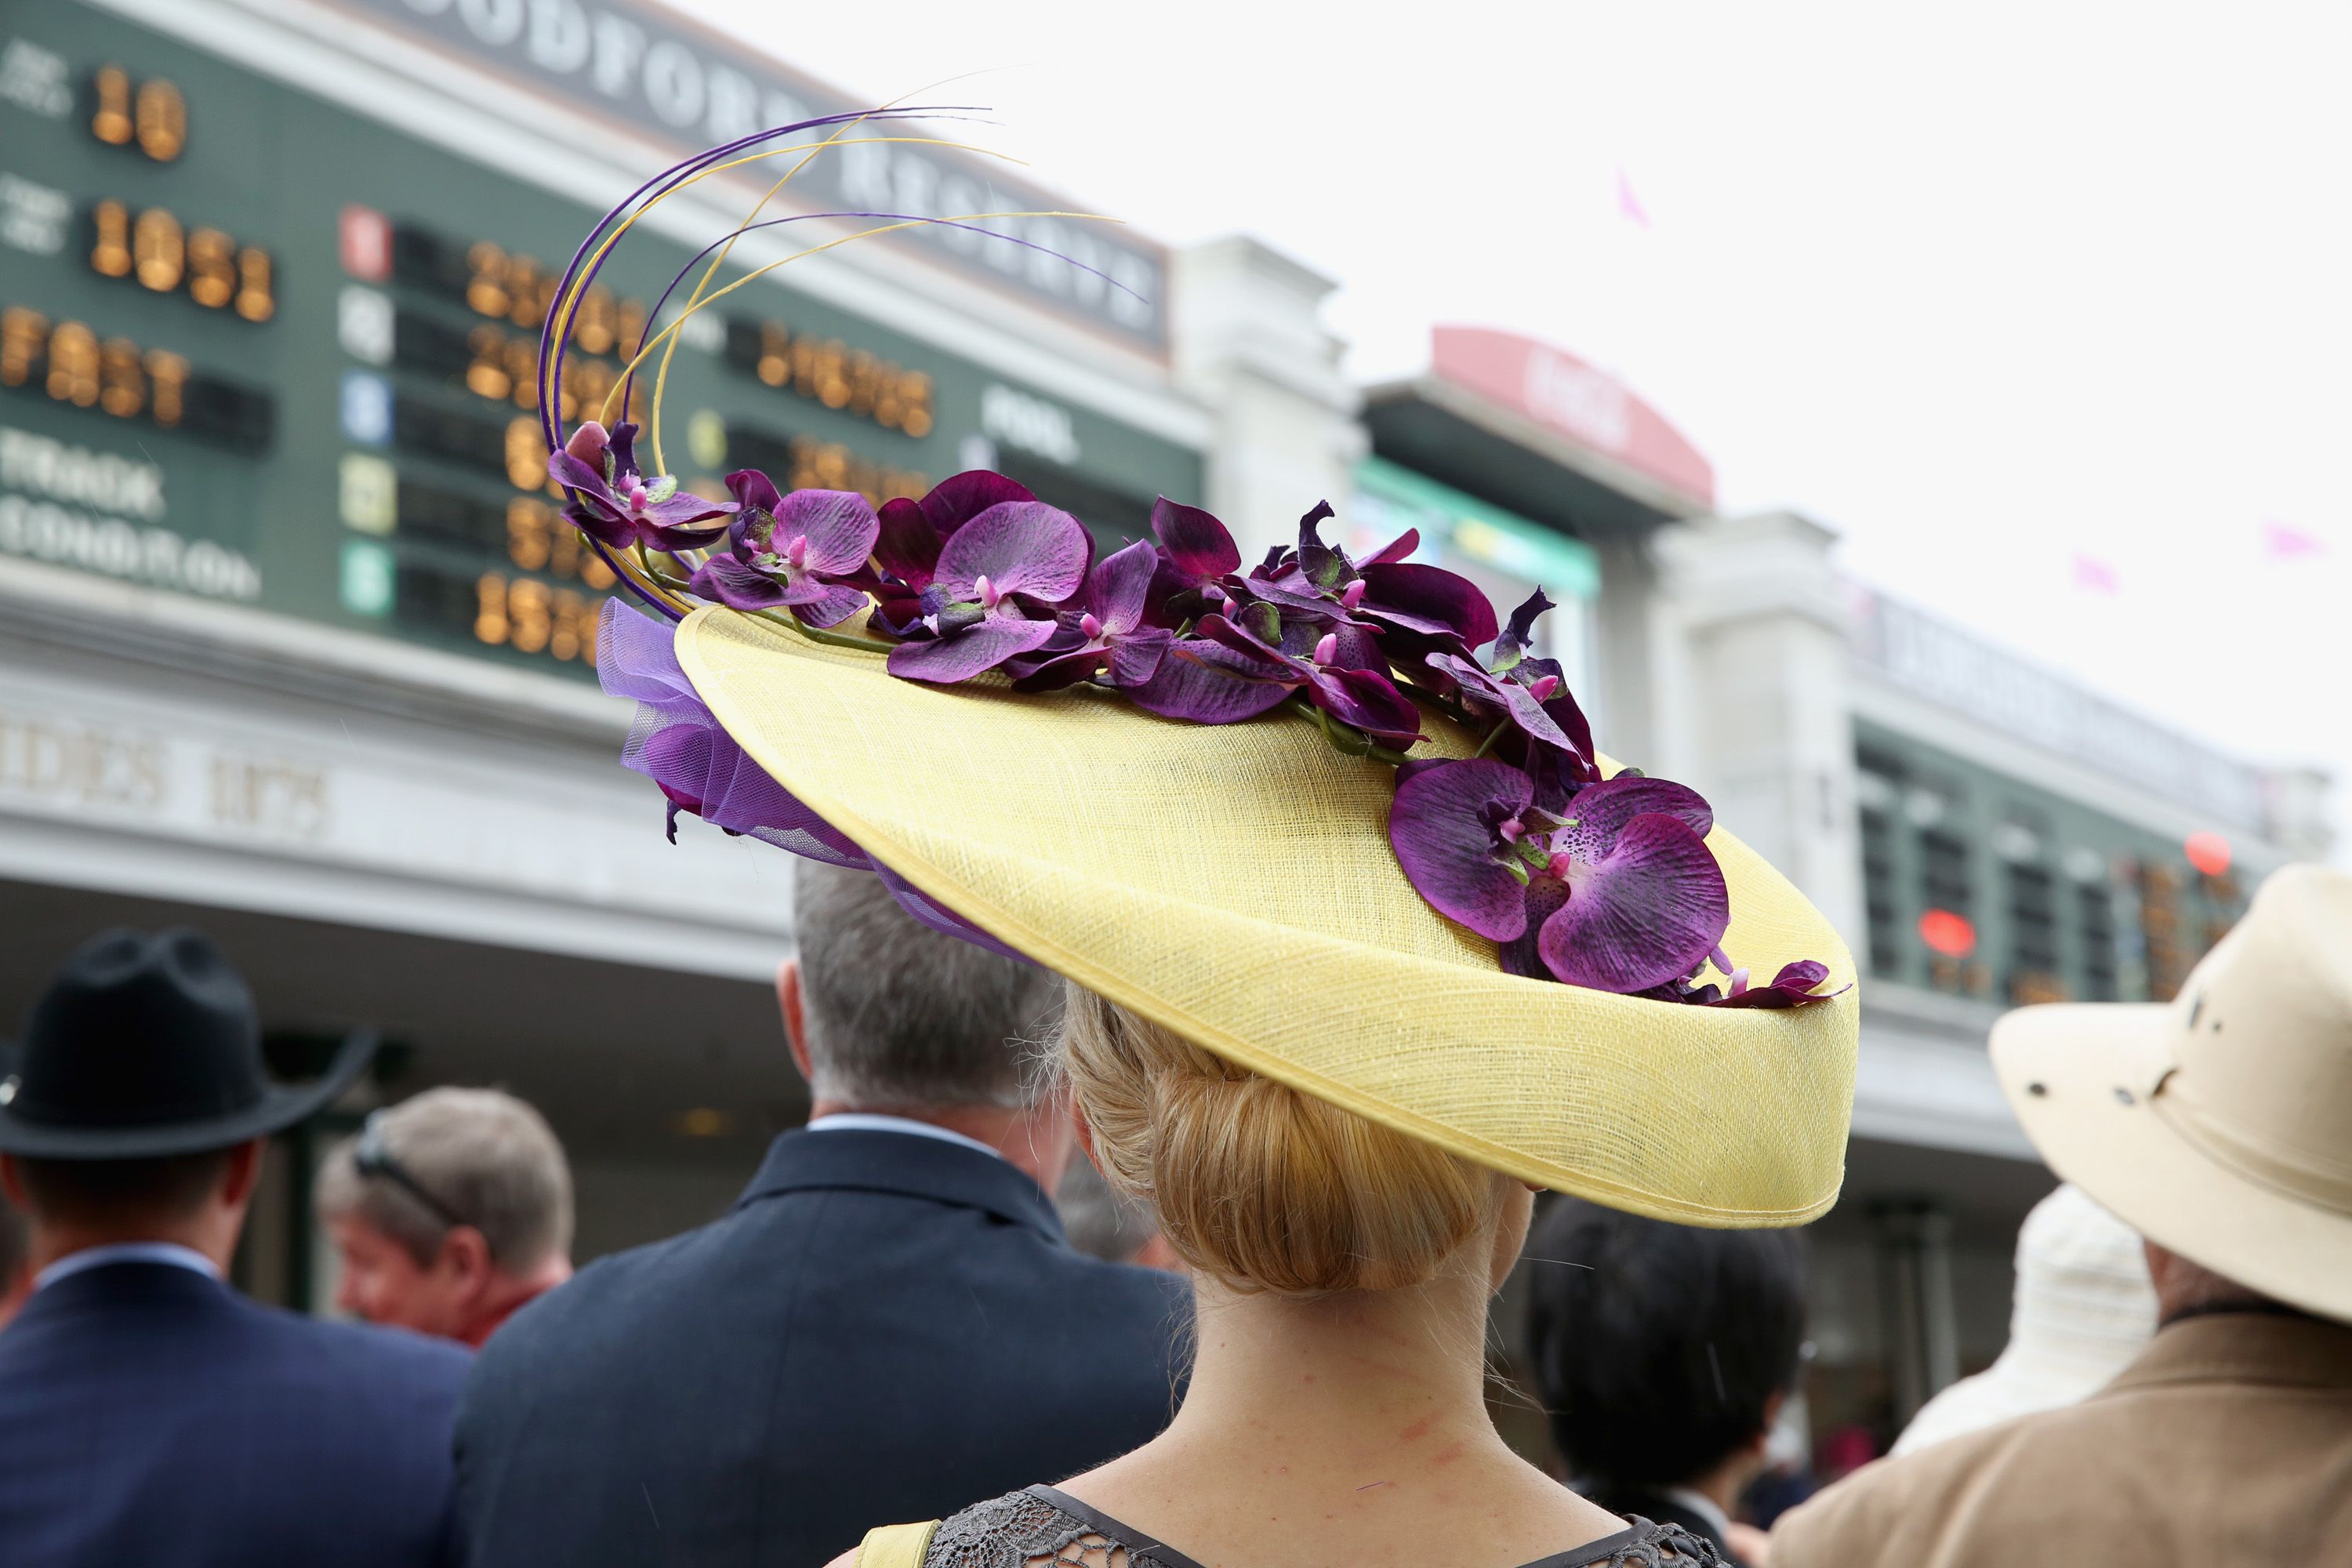 2023 Kentucky Derby brings colorful fashion to Churchill Downs